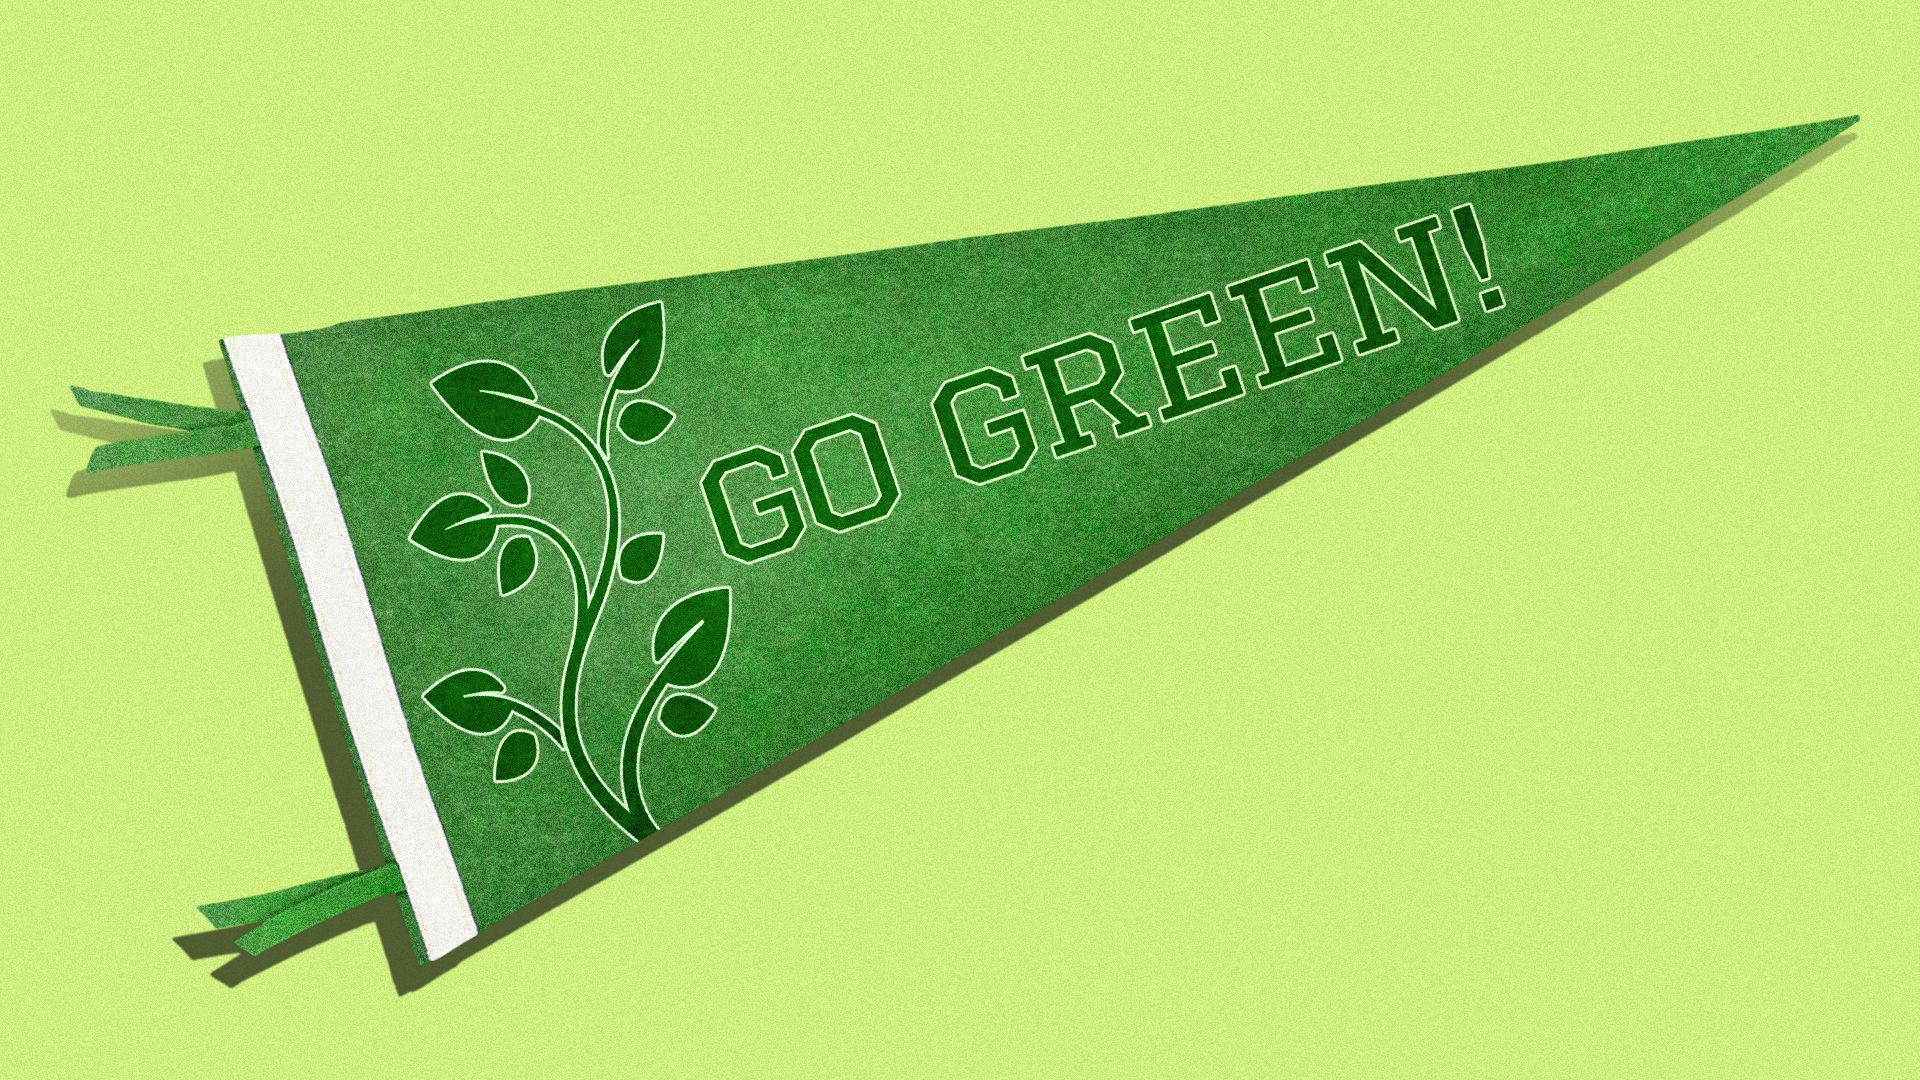 Illustration of a college pennant with a plant logo and the words "Go Green!".